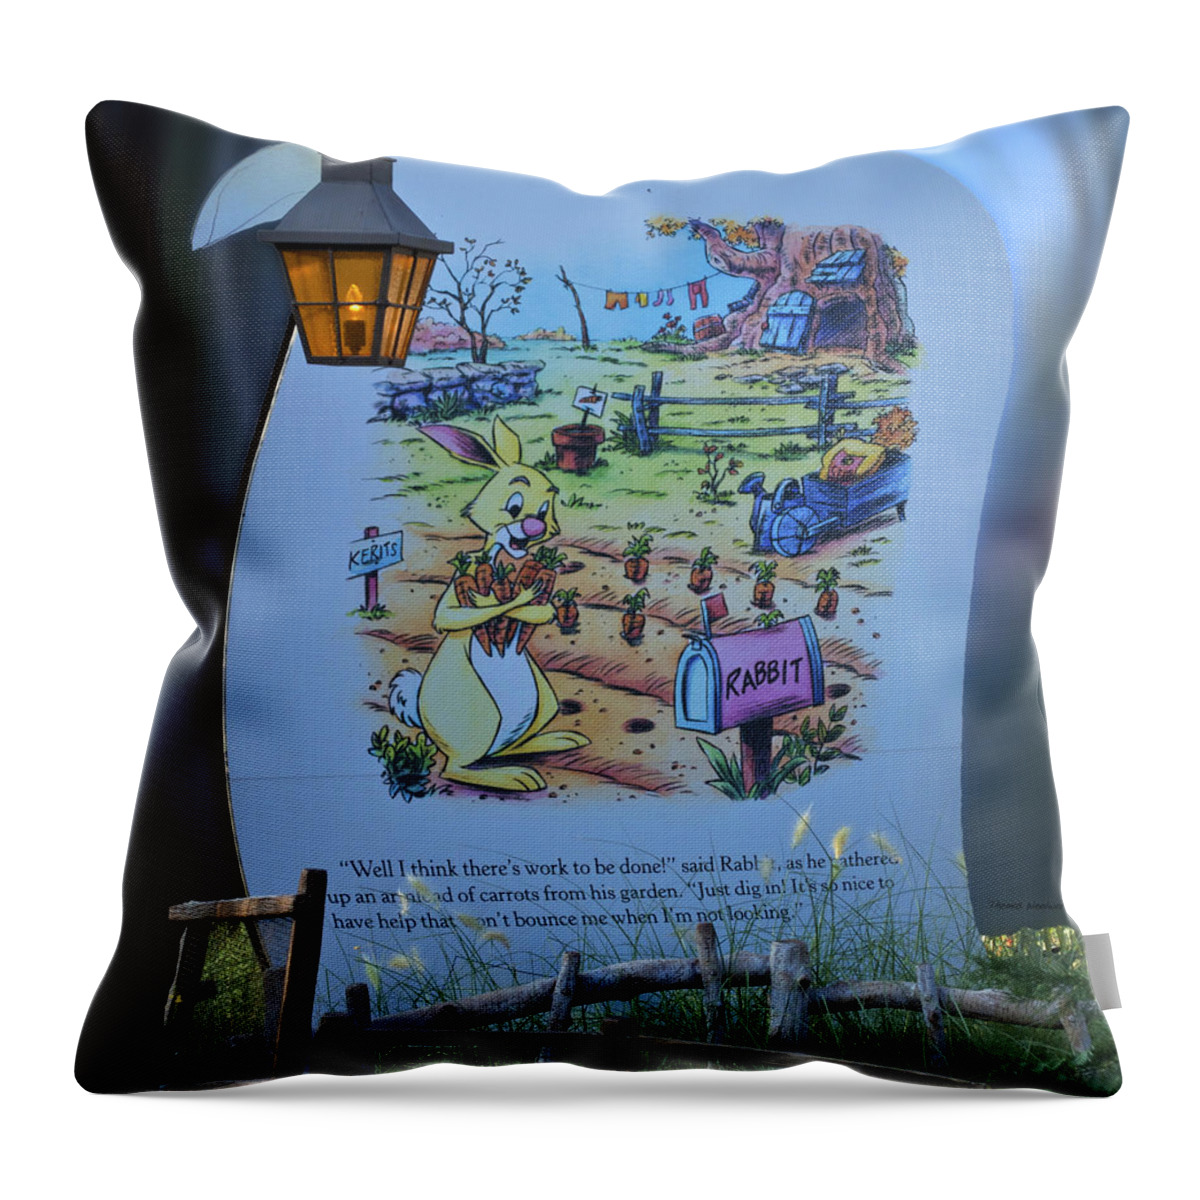 Photograph Throw Pillow featuring the photograph Rabbit Signage Walt Disney World by Thomas Woolworth